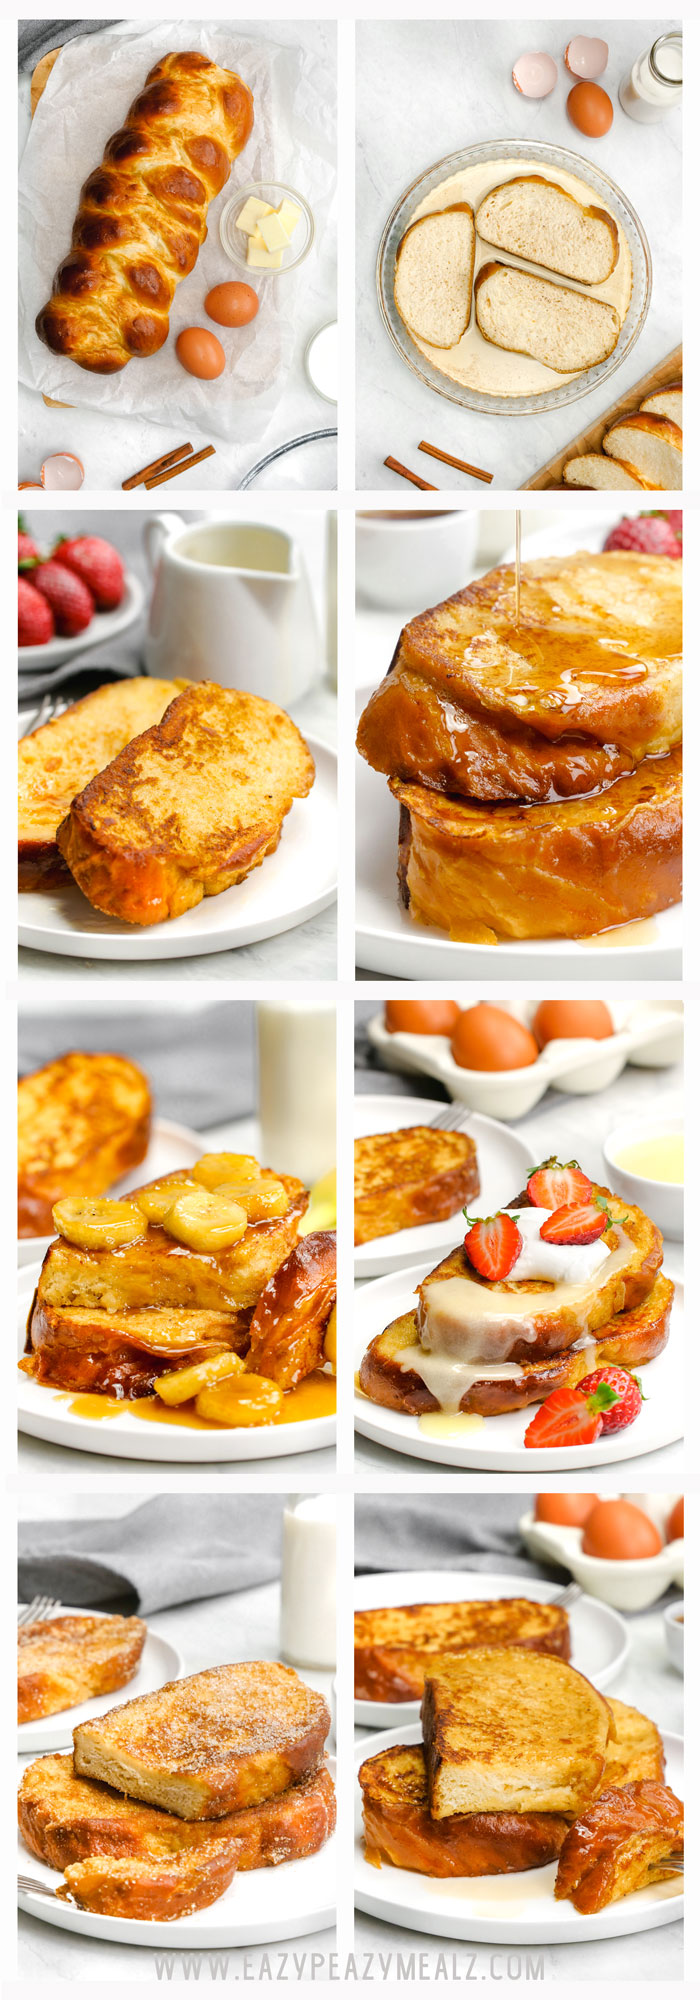 French toast- classic french toast topped 4 ways. 